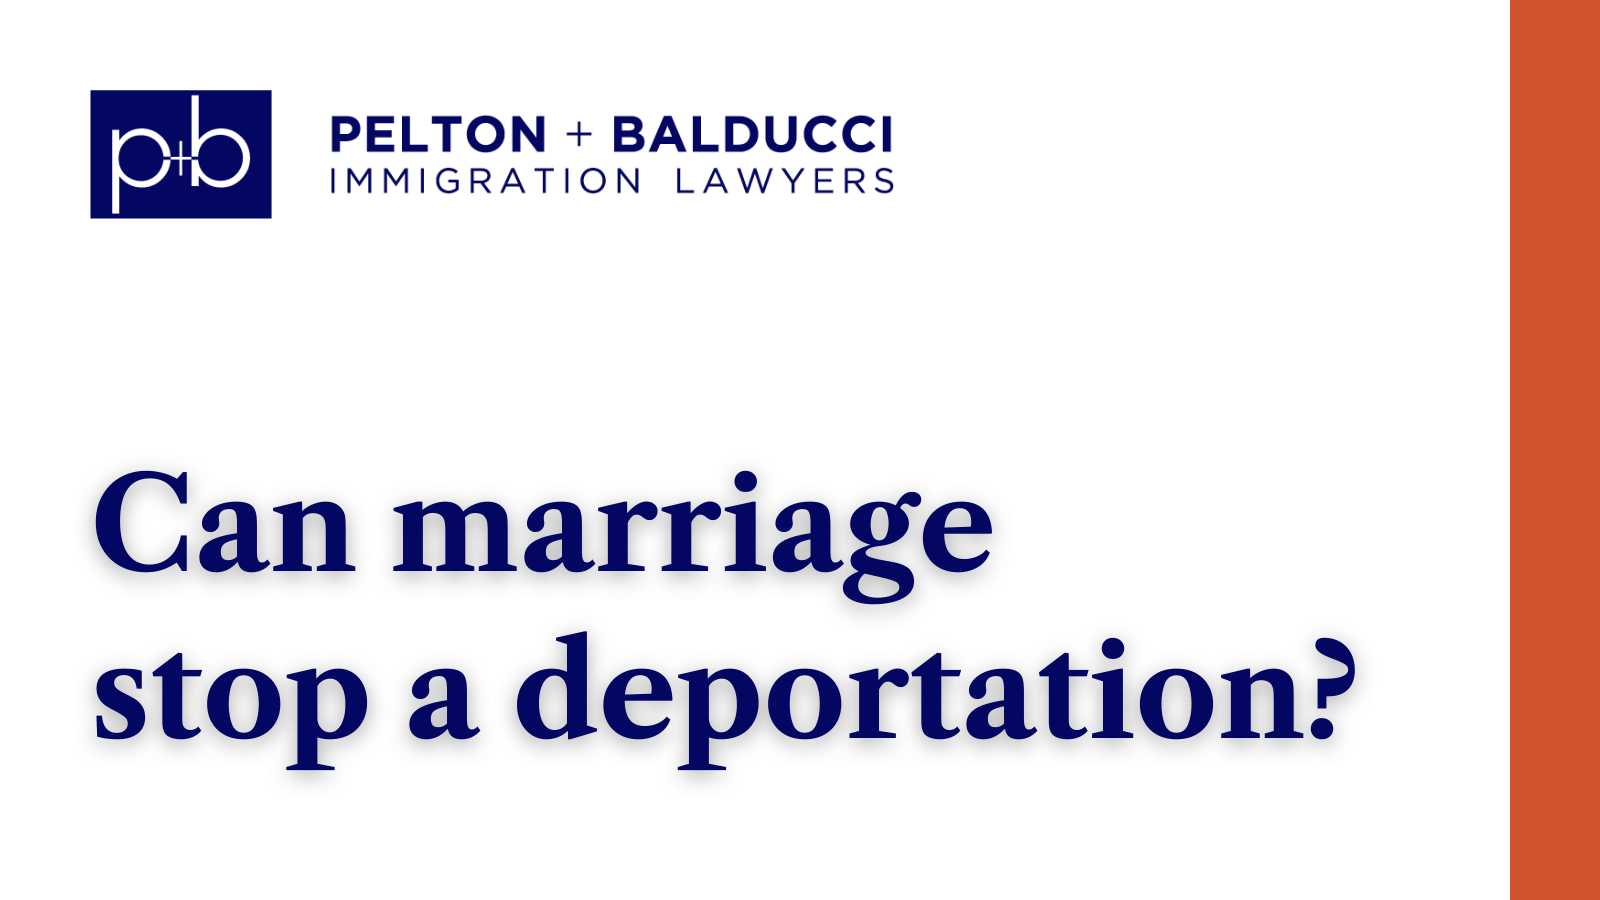 Can marriage stop a deportation - New Orleans Immigration Lawyers - Pelton Balducci